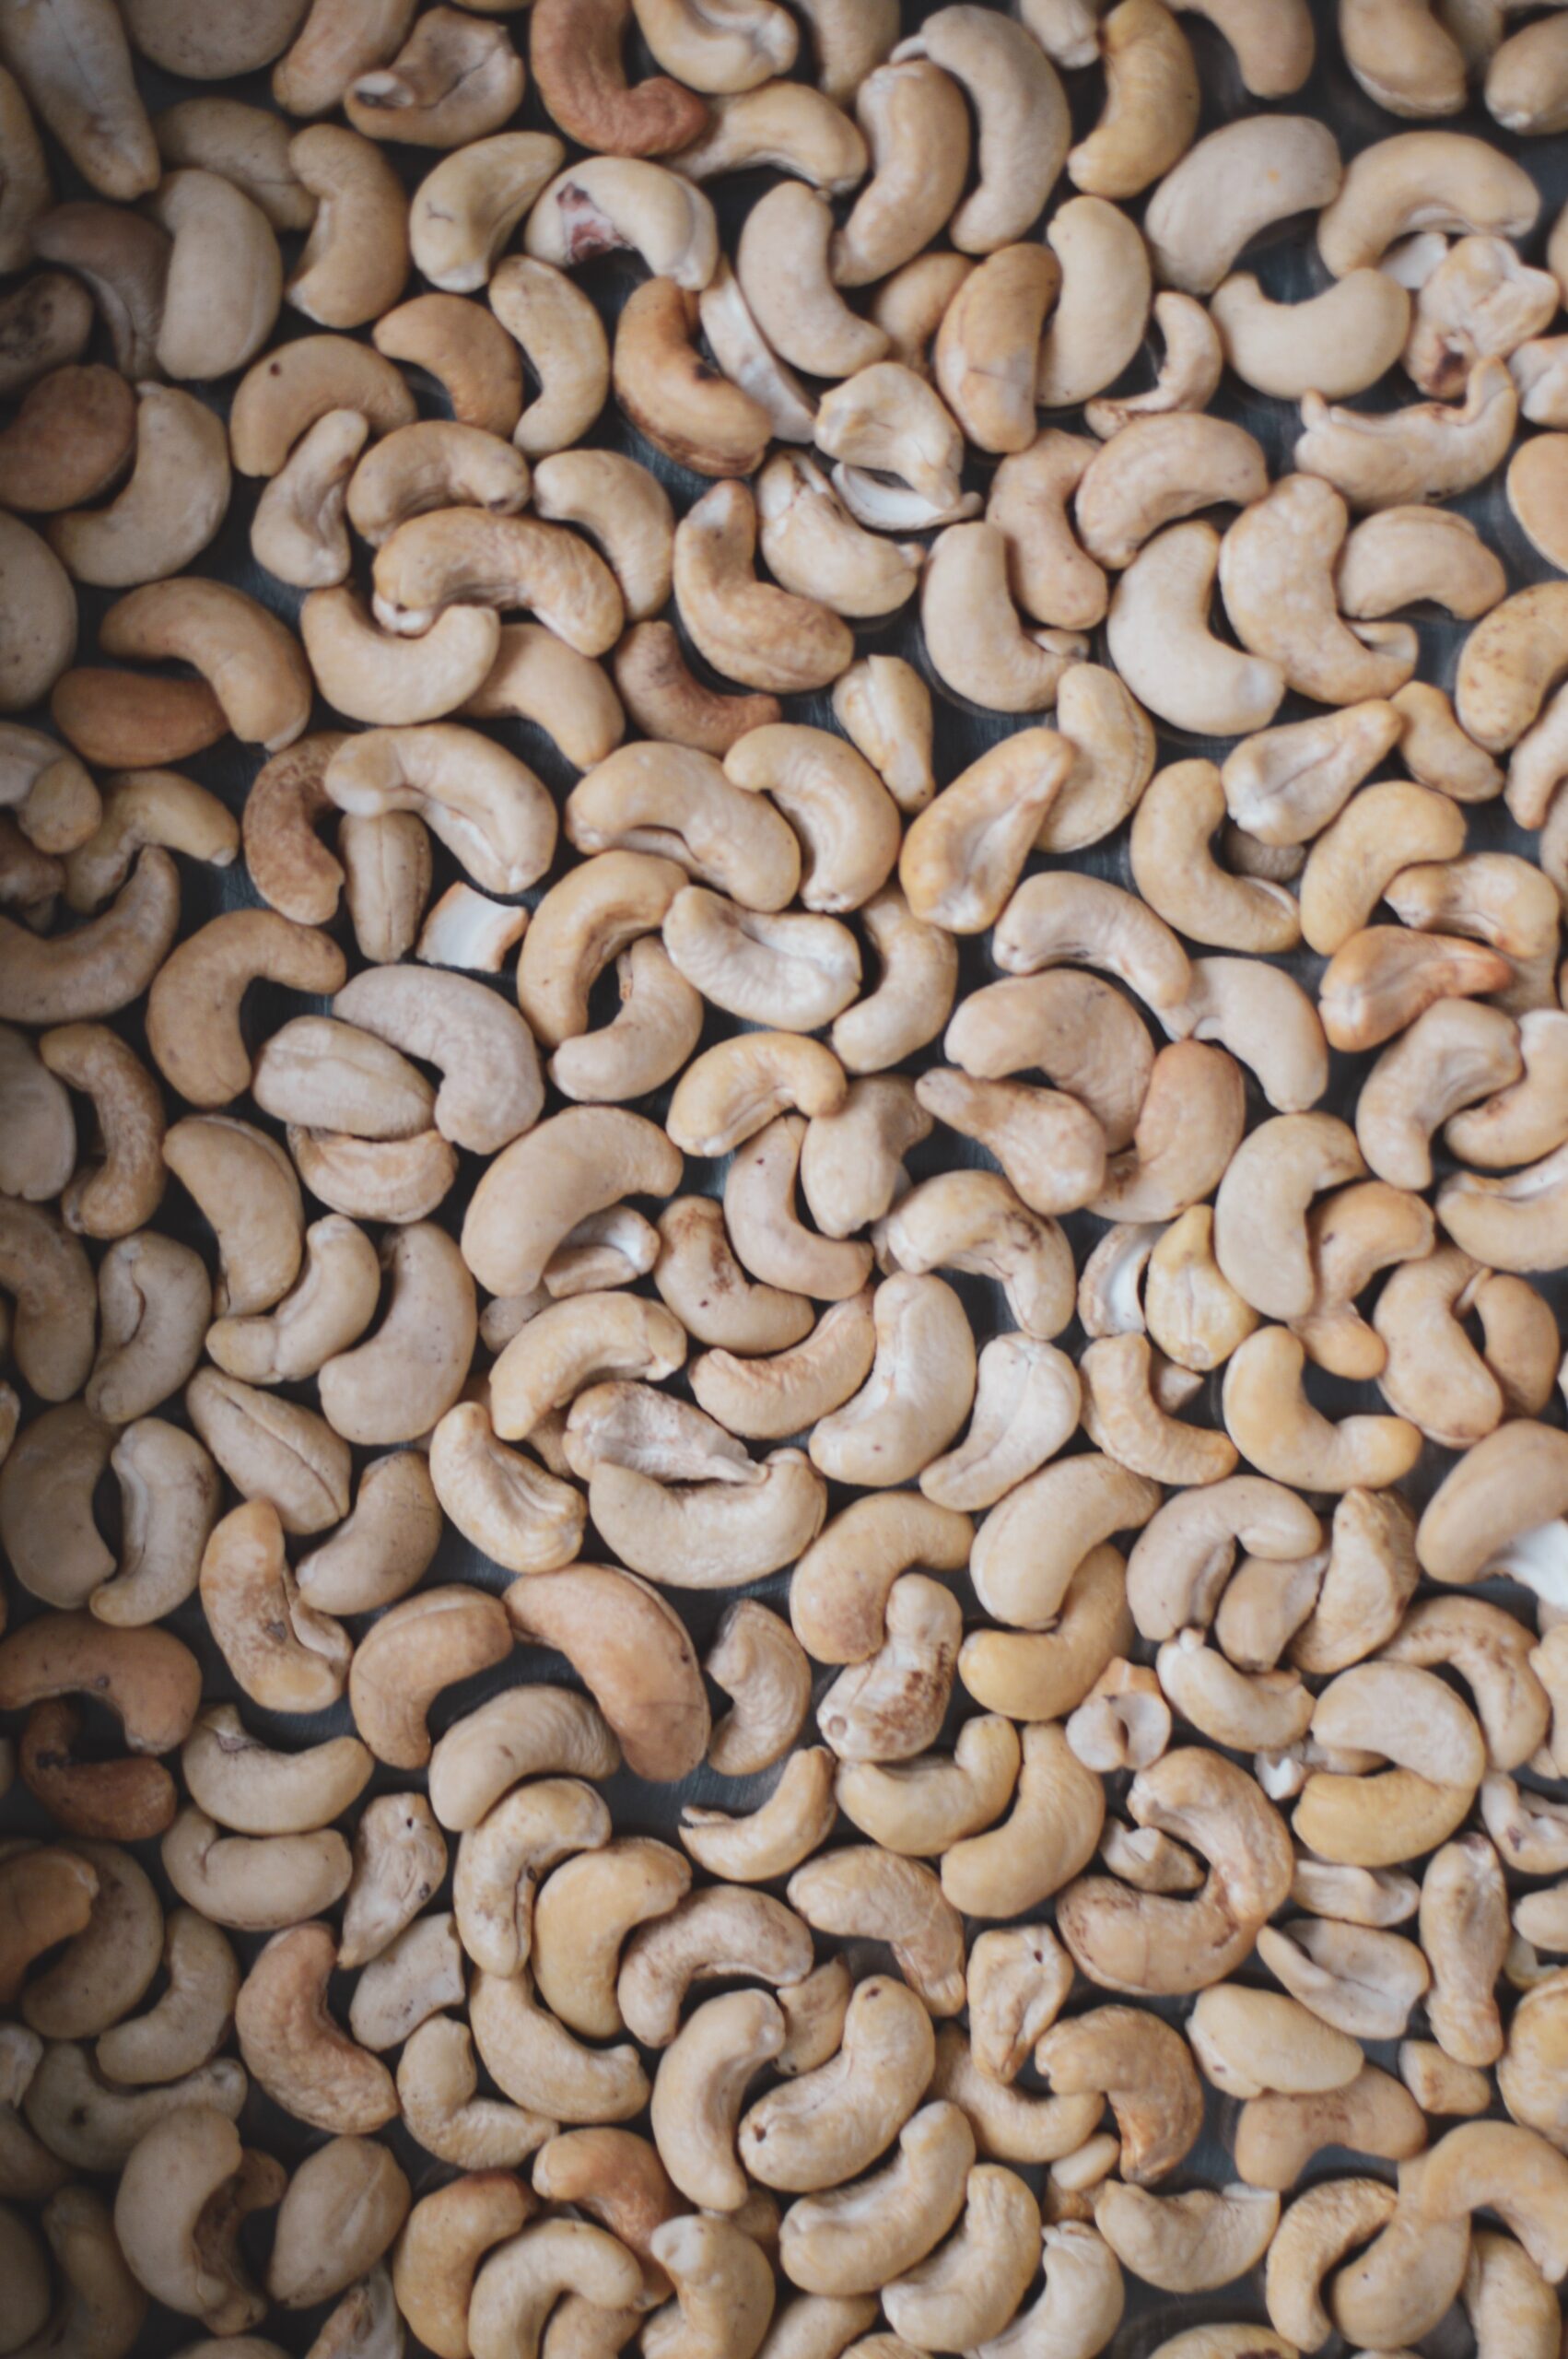 Are Cashews Good For Dogs?